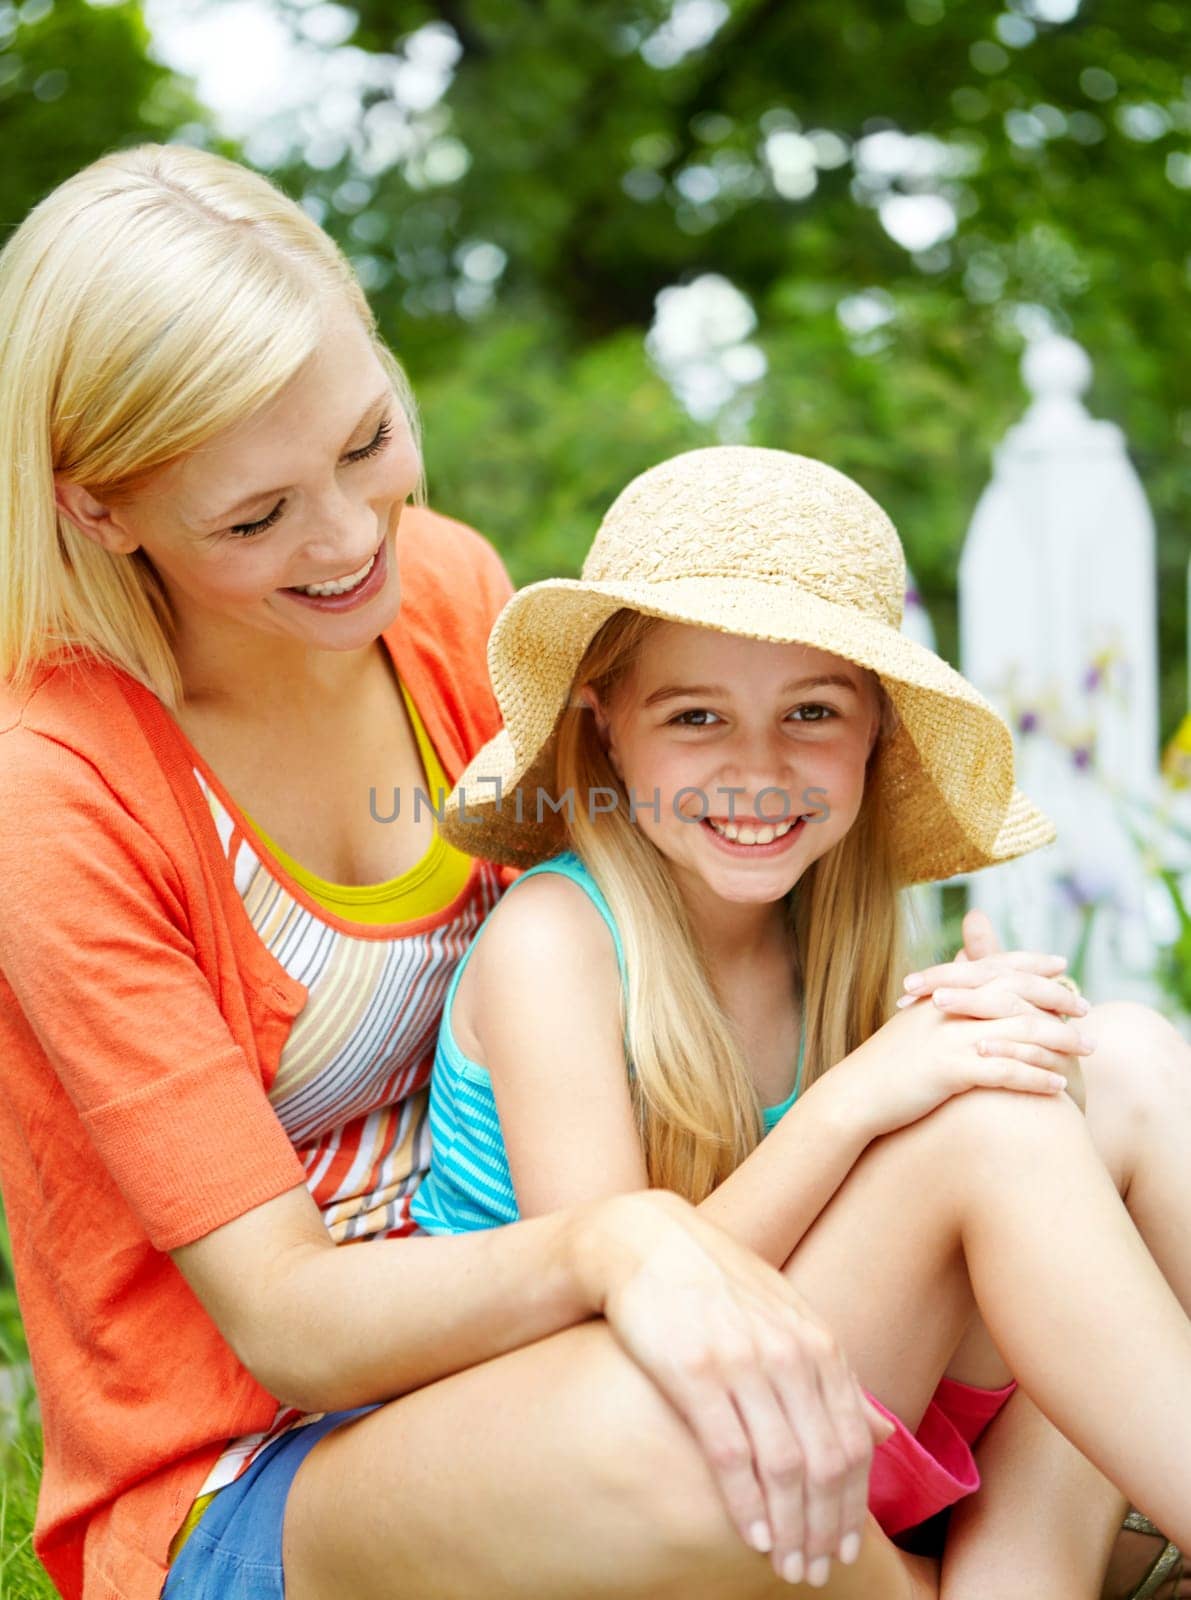 Making summer memories. Cute litte girl sitting on the grass outdoors with her mom